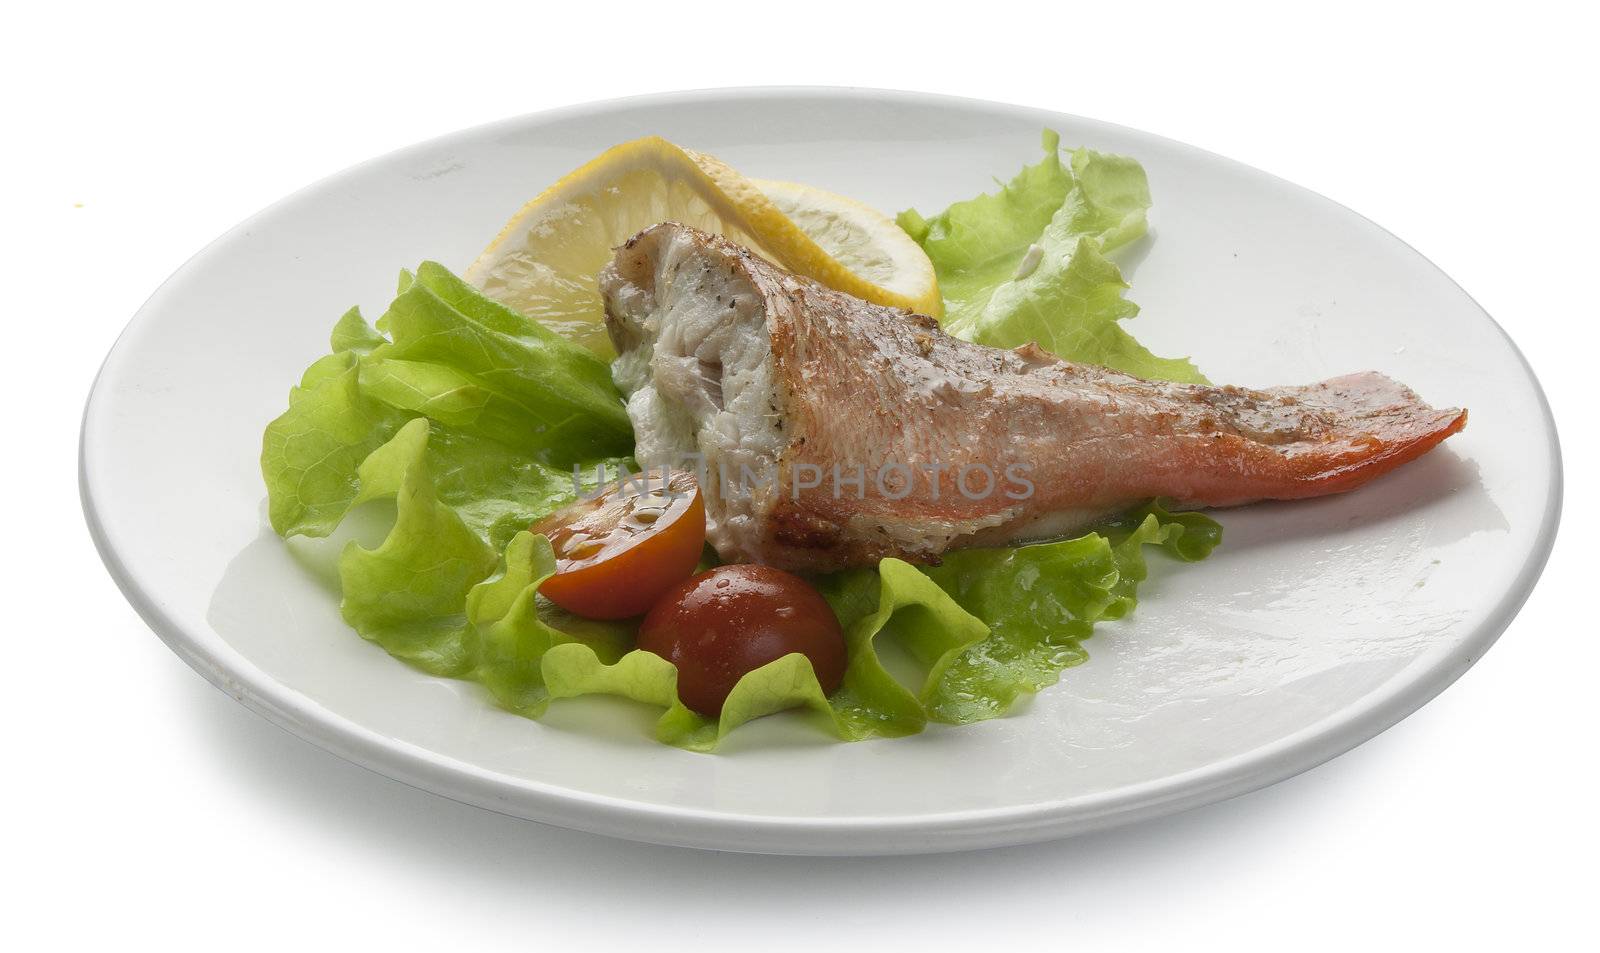 Baked rosefish with lettuce, tomato and lemon on the plate